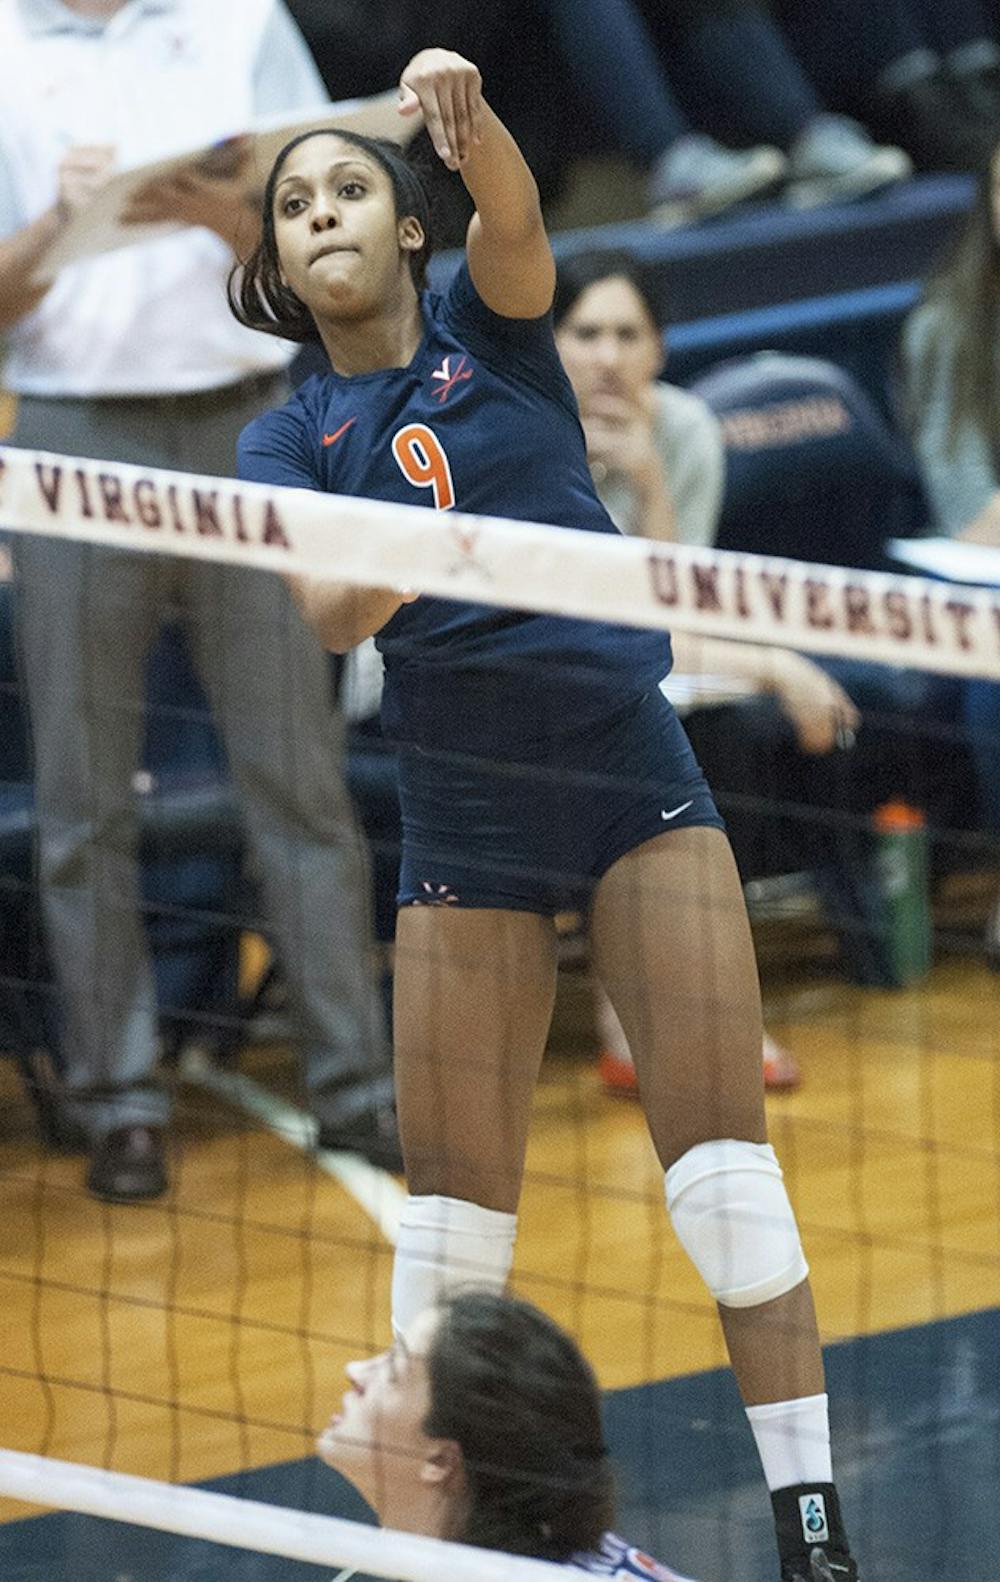 <p>Senior outside hitter&nbsp;Jasmine Burton had 11 kills against Buffalo Friday. Virginia won its first two games before falling against Northwestern in the Cavalier Classic title game.</p>